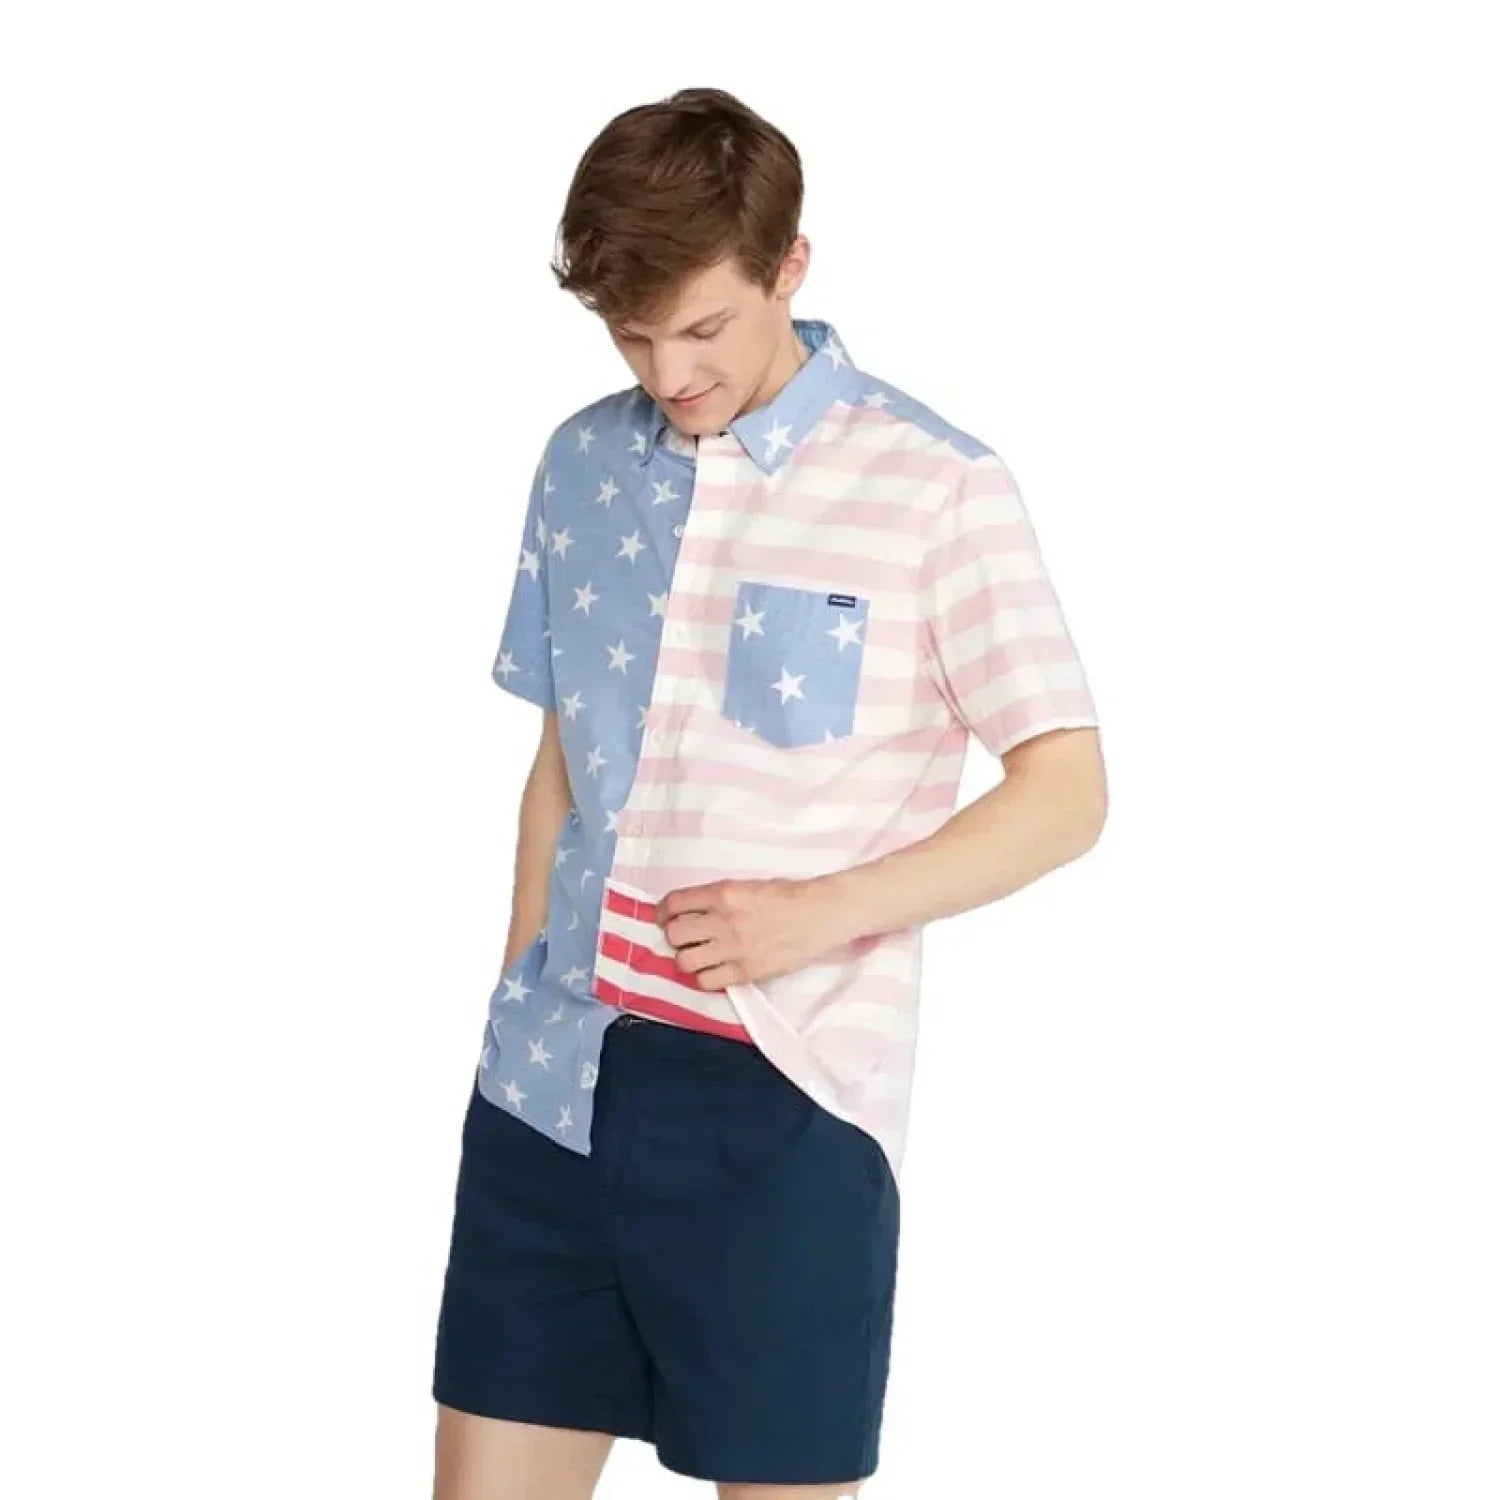 Chubbies 01. MENS APPAREL - MENS SS SHIRTS - MENS SS BUTTON UP Men's Friday Shirt THE UNCLE SAM